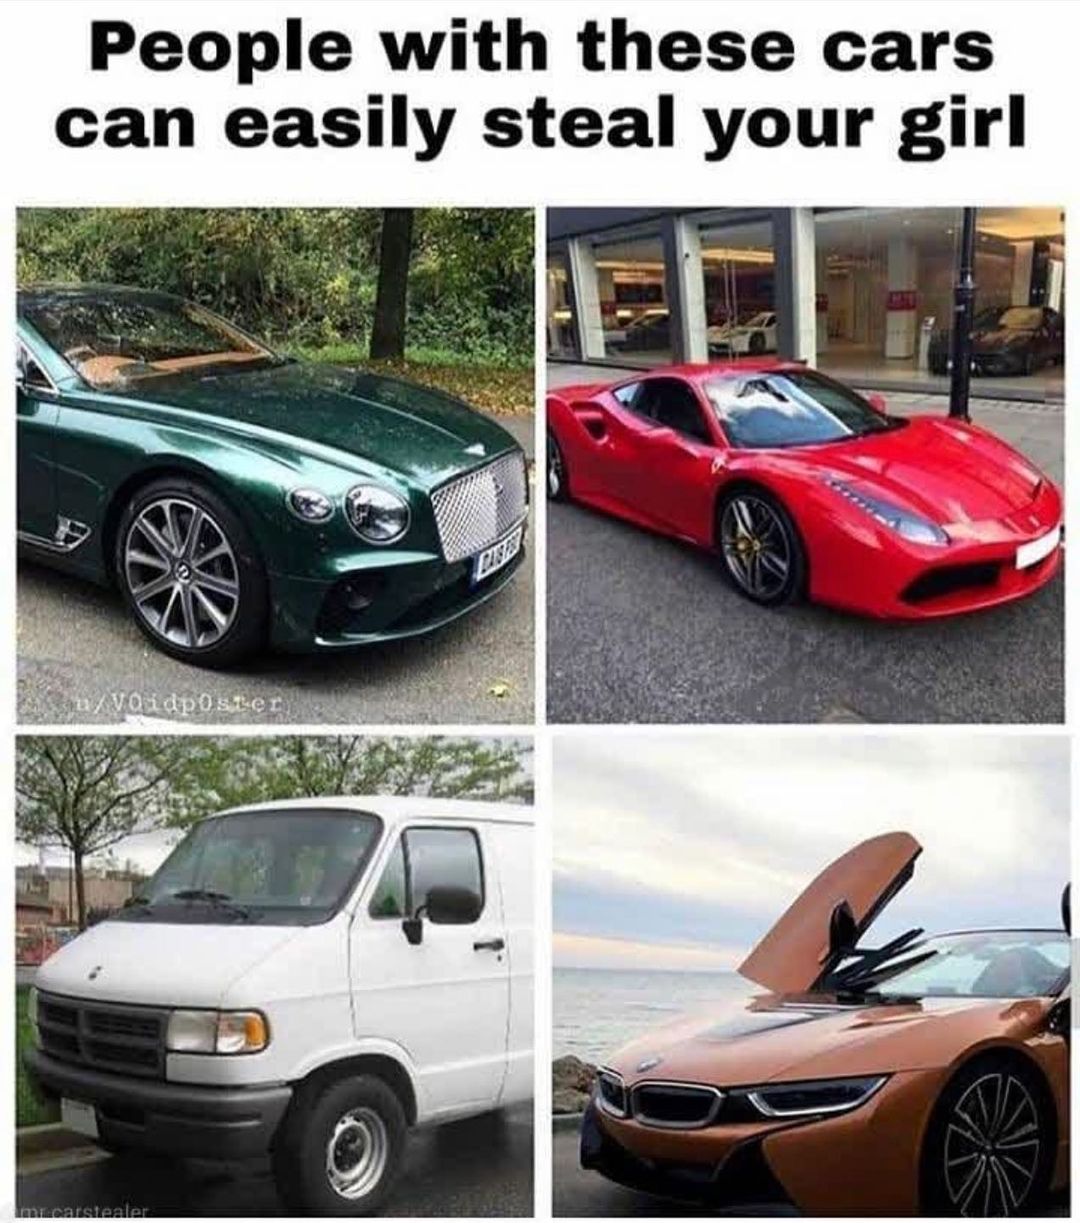 People with these cars can easily steal your girl.